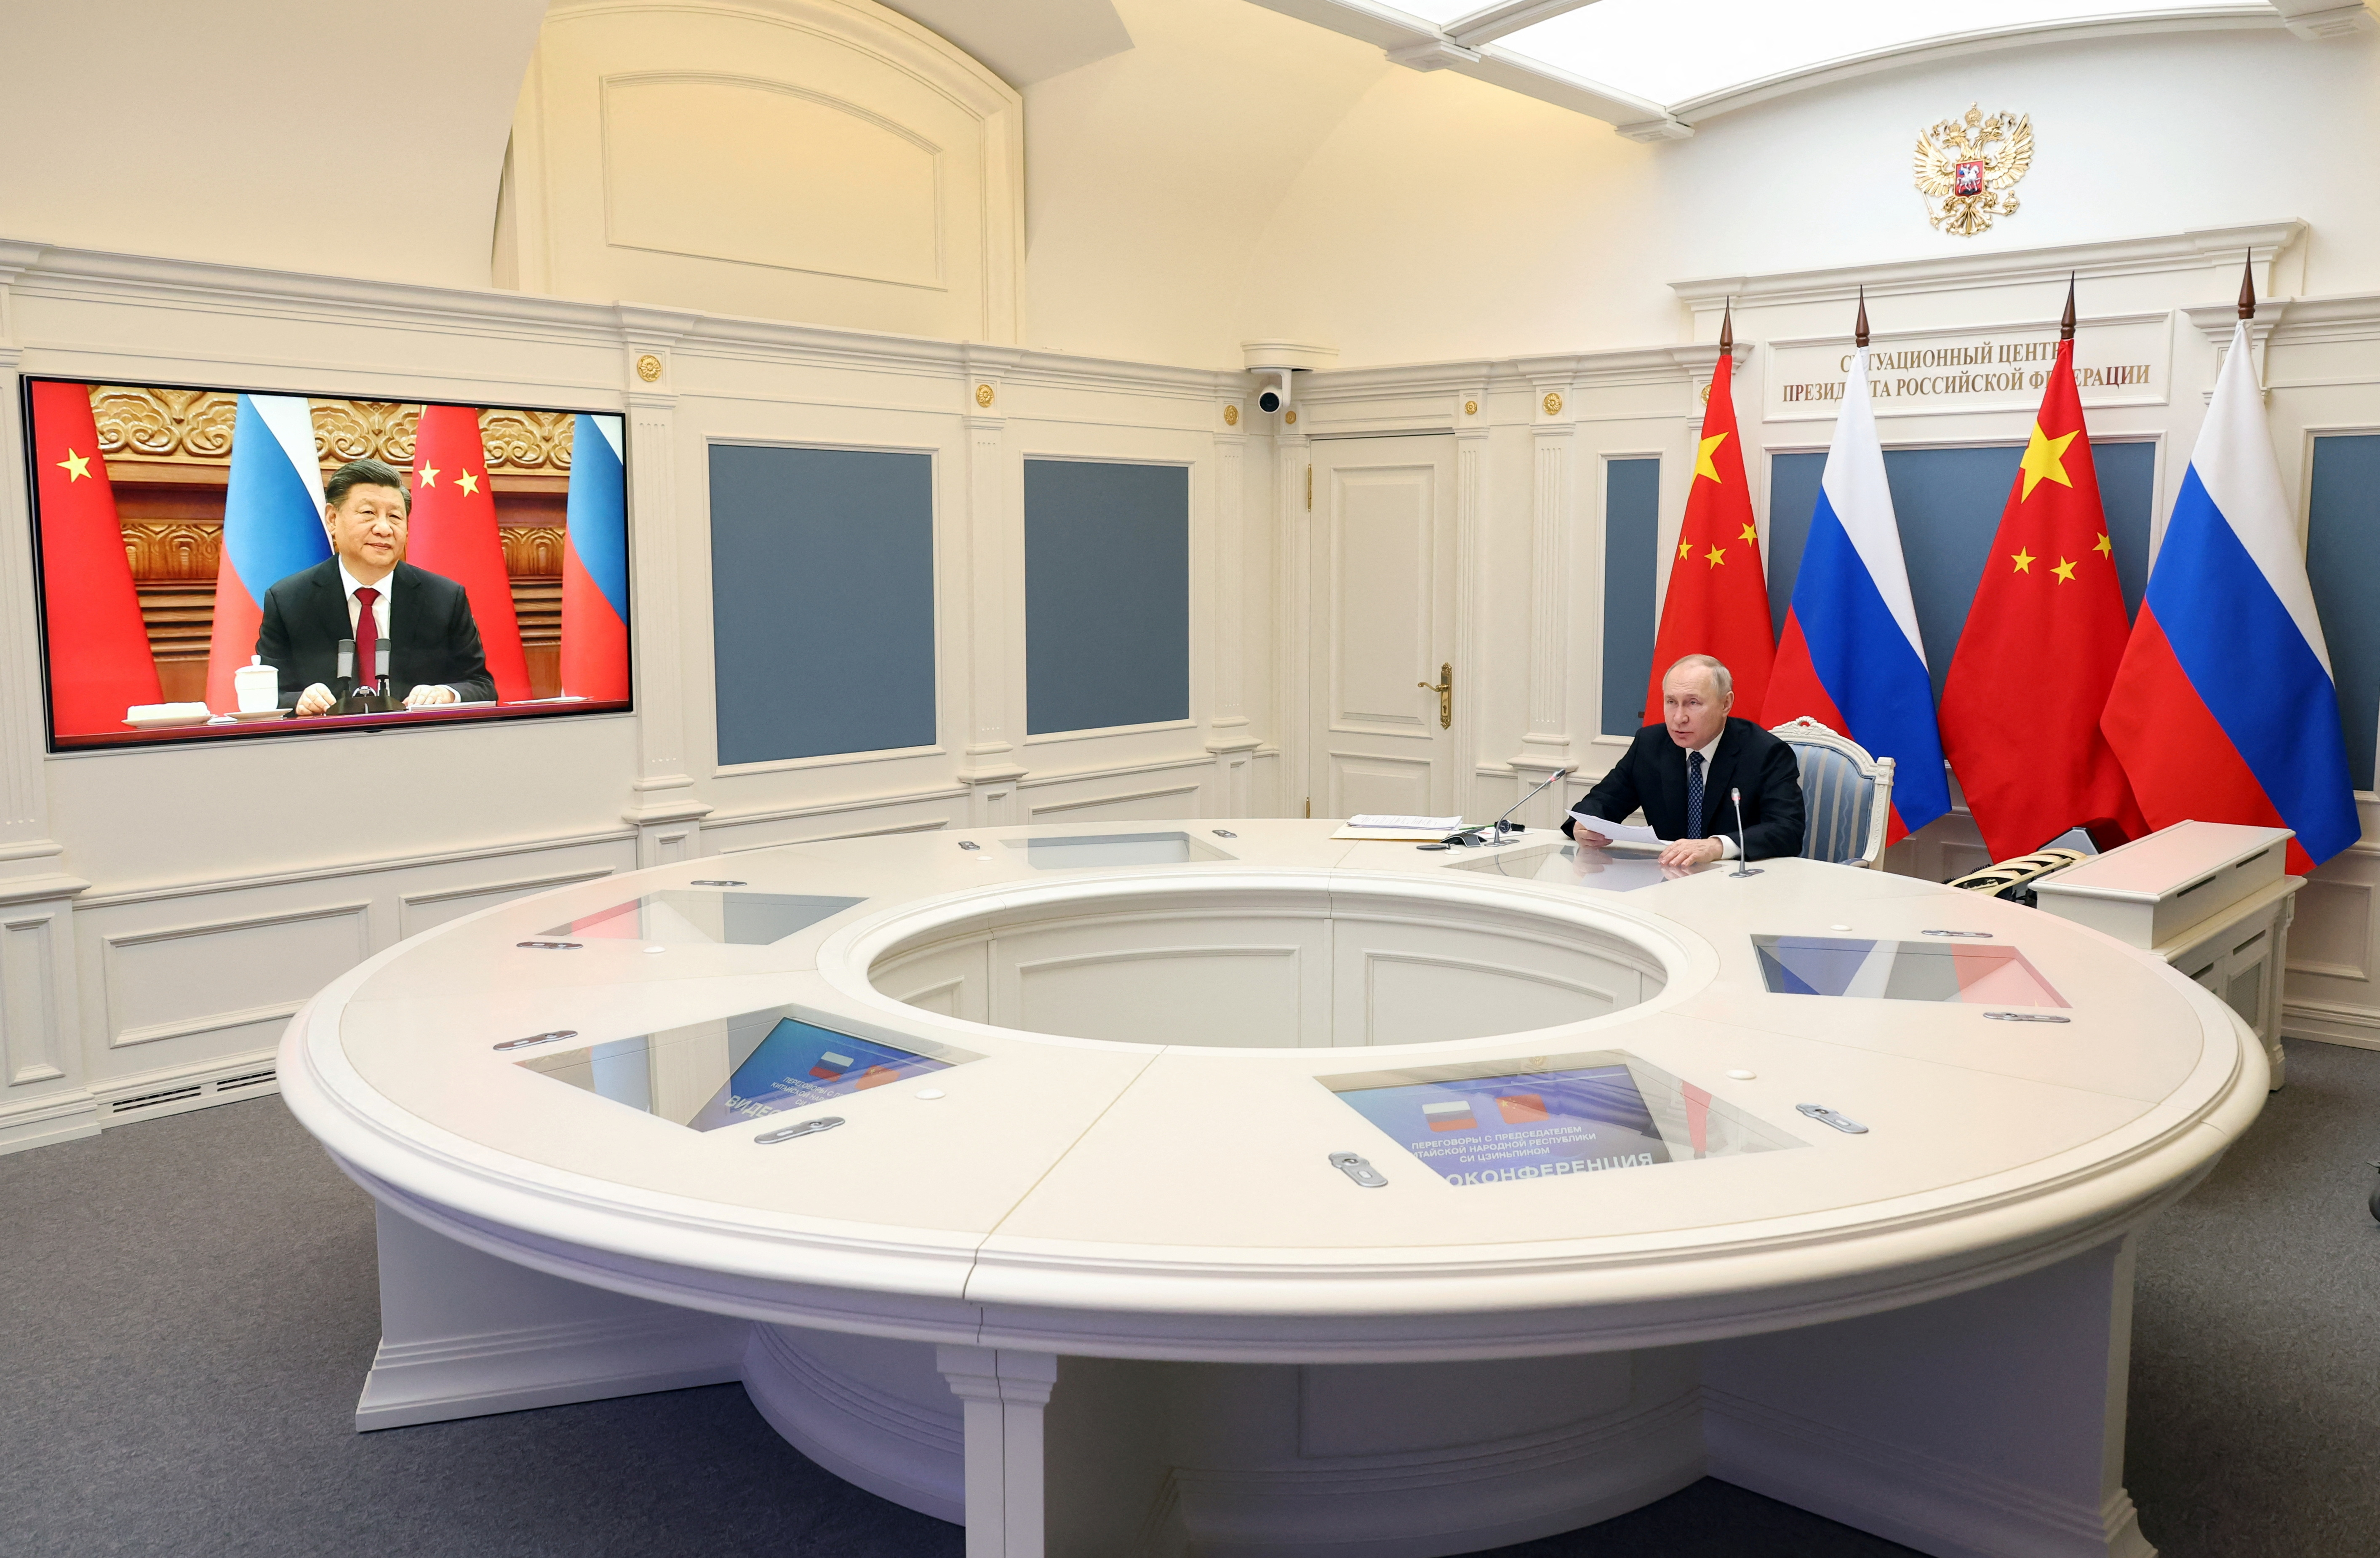 At the end of December, Xi and Putin had a phone call in which they agreed to cooperate on trade, energy, finance and agriculture (Sputnik/Mikhail Kuravlev/Kremlin via REUTERS)